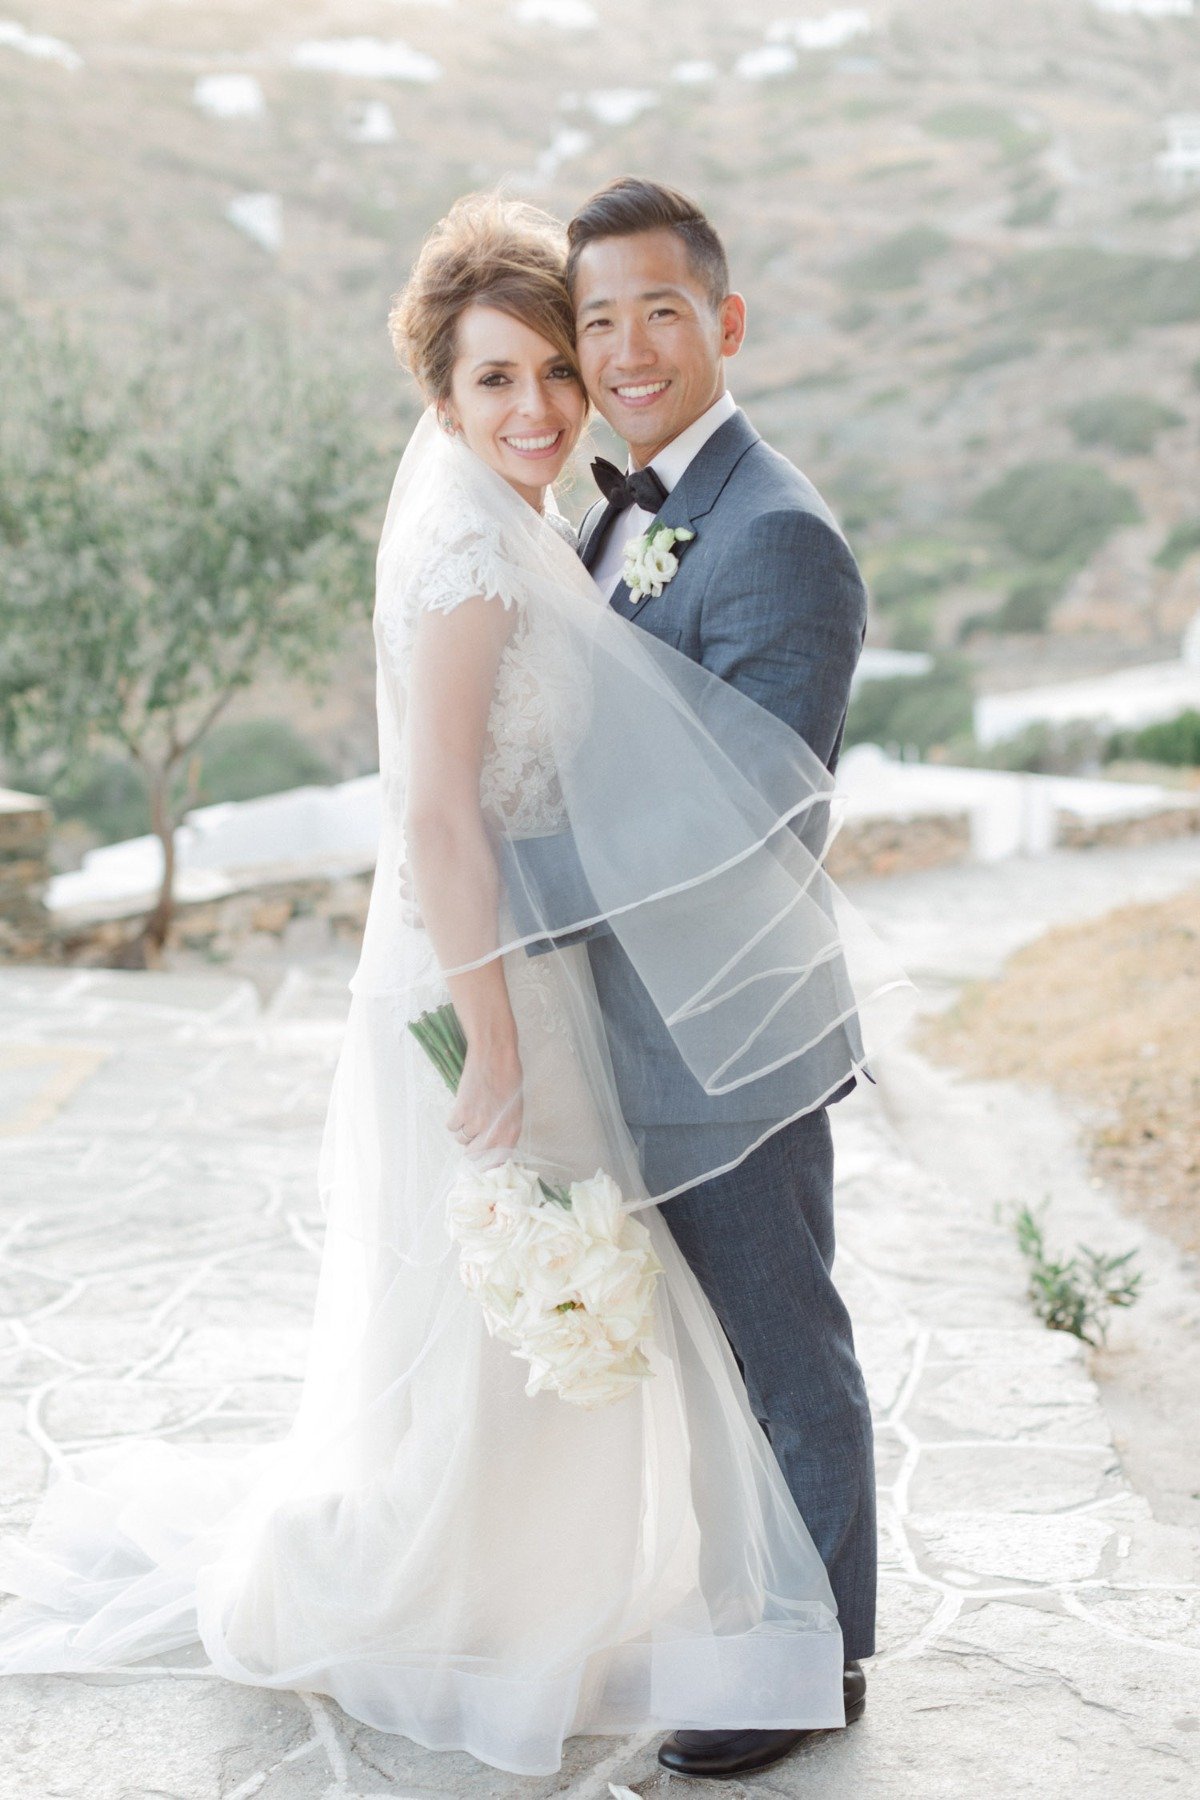 Katerina and Dominique's Greece wedding